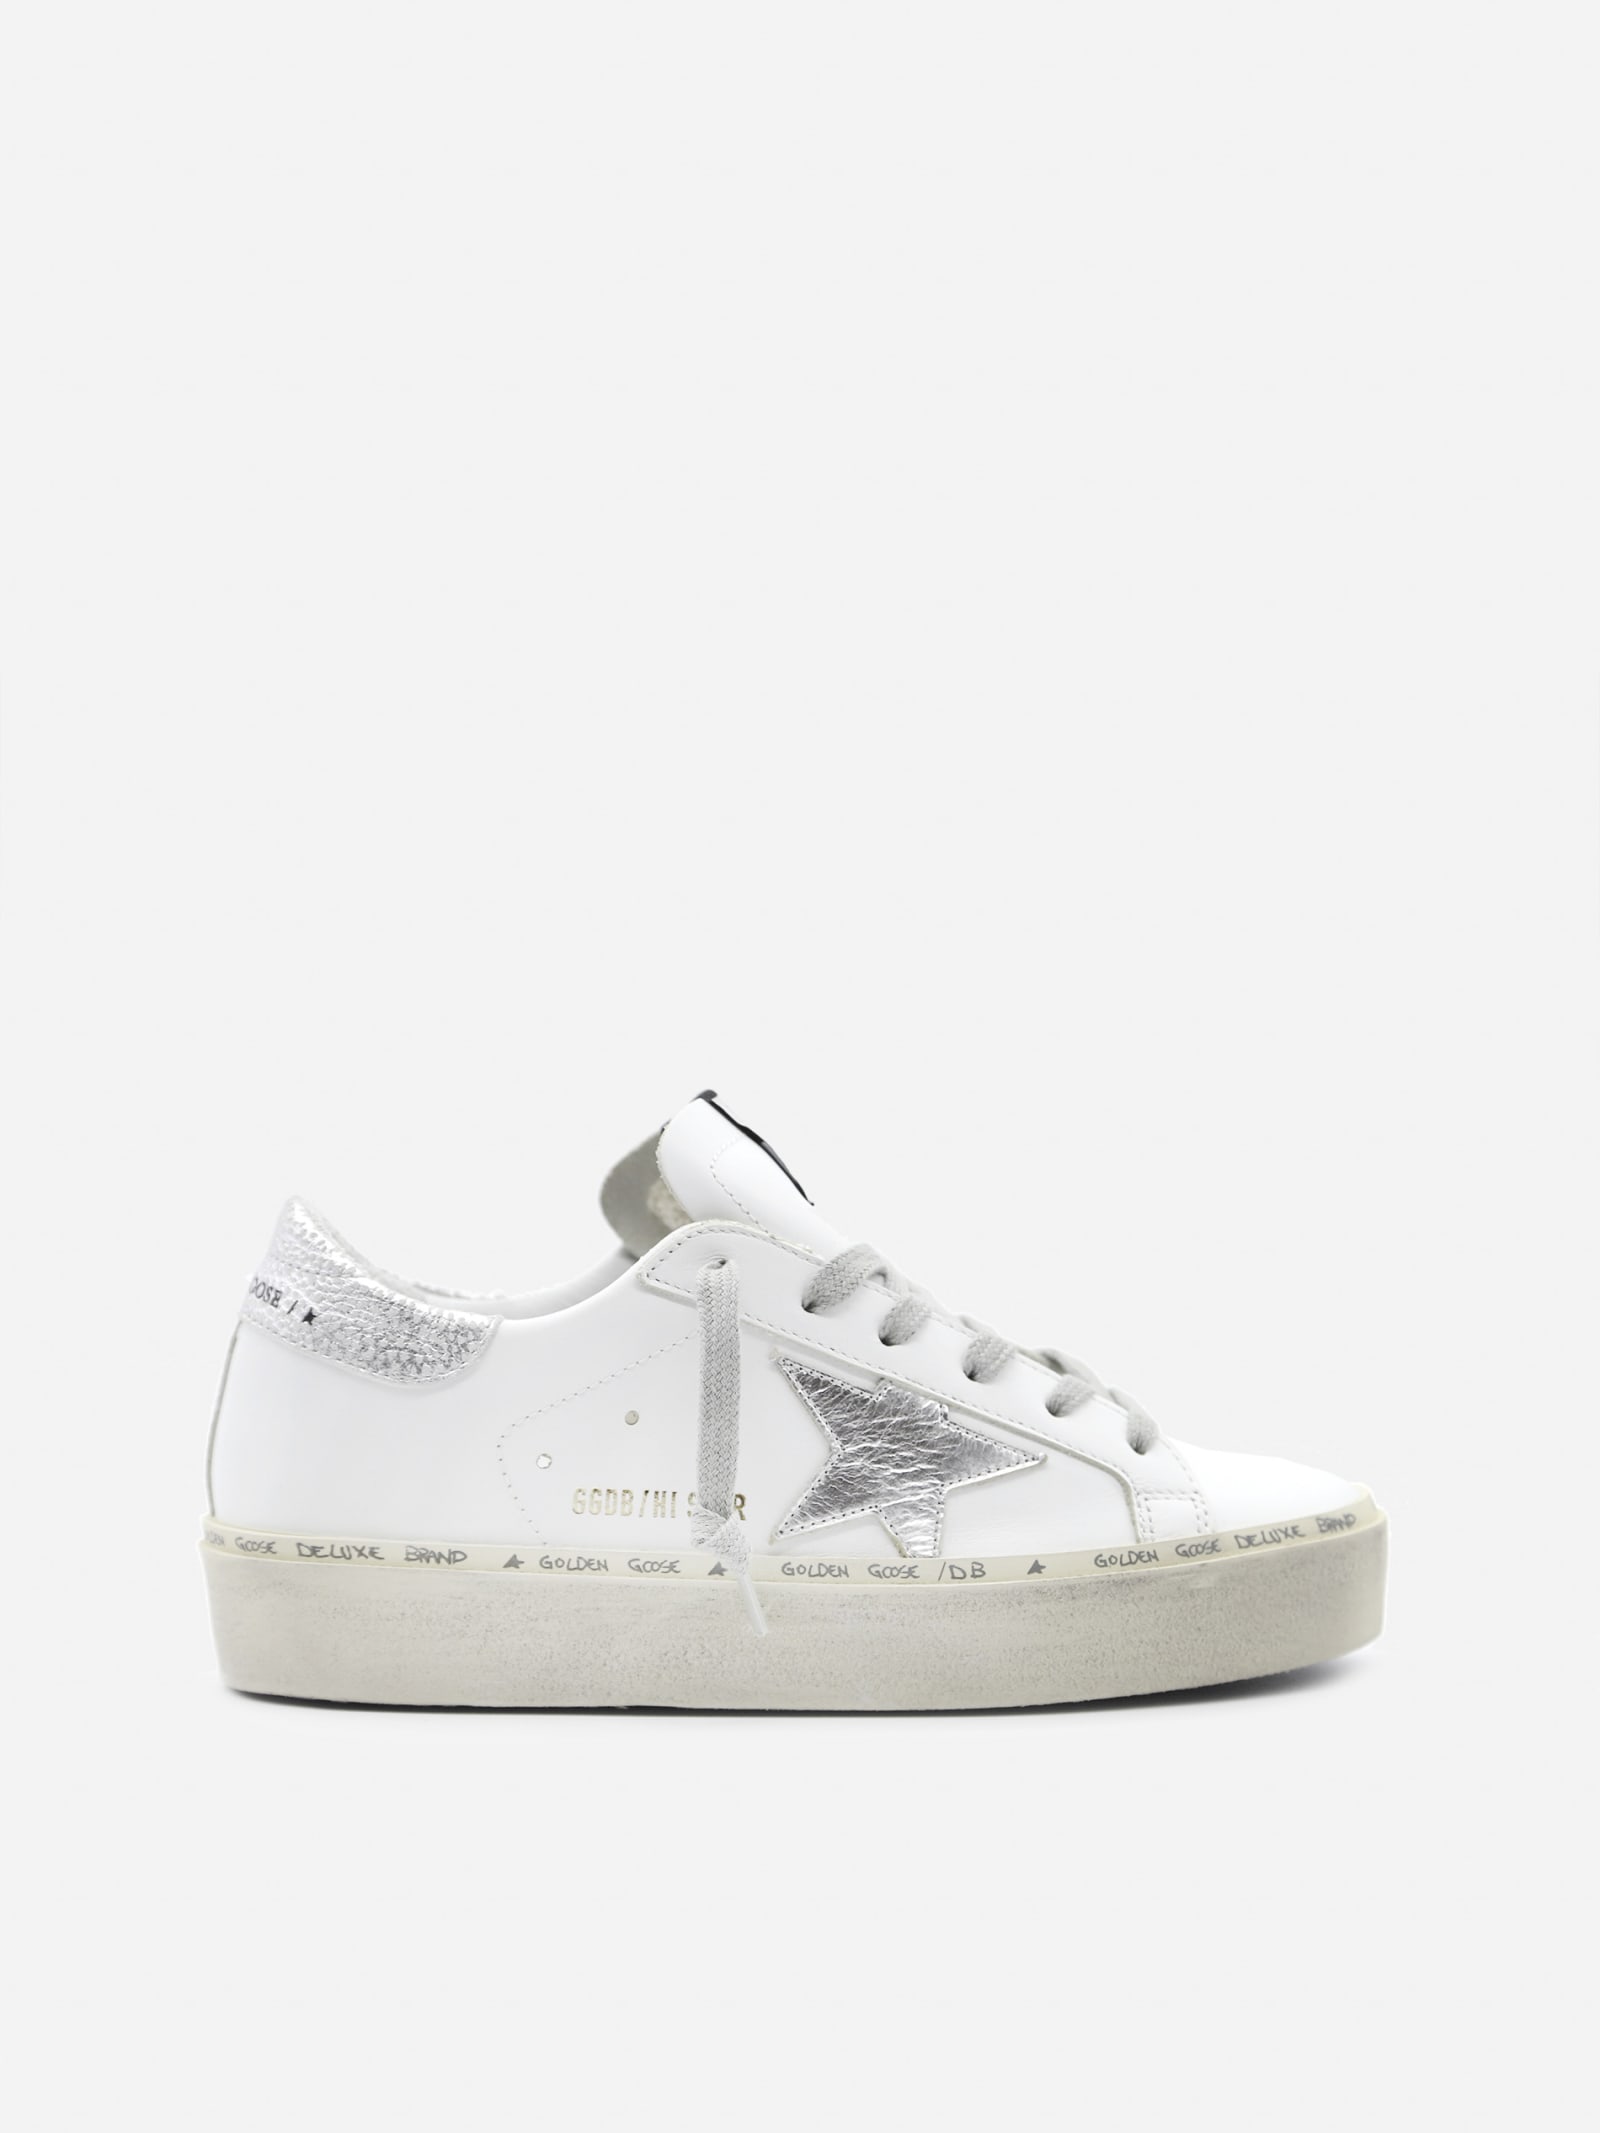 GOLDEN GOOSE HI STAR SNEAKER IN LEATHER WITH LAMINATED EFFECT INSERTS,GWF00118 -80185